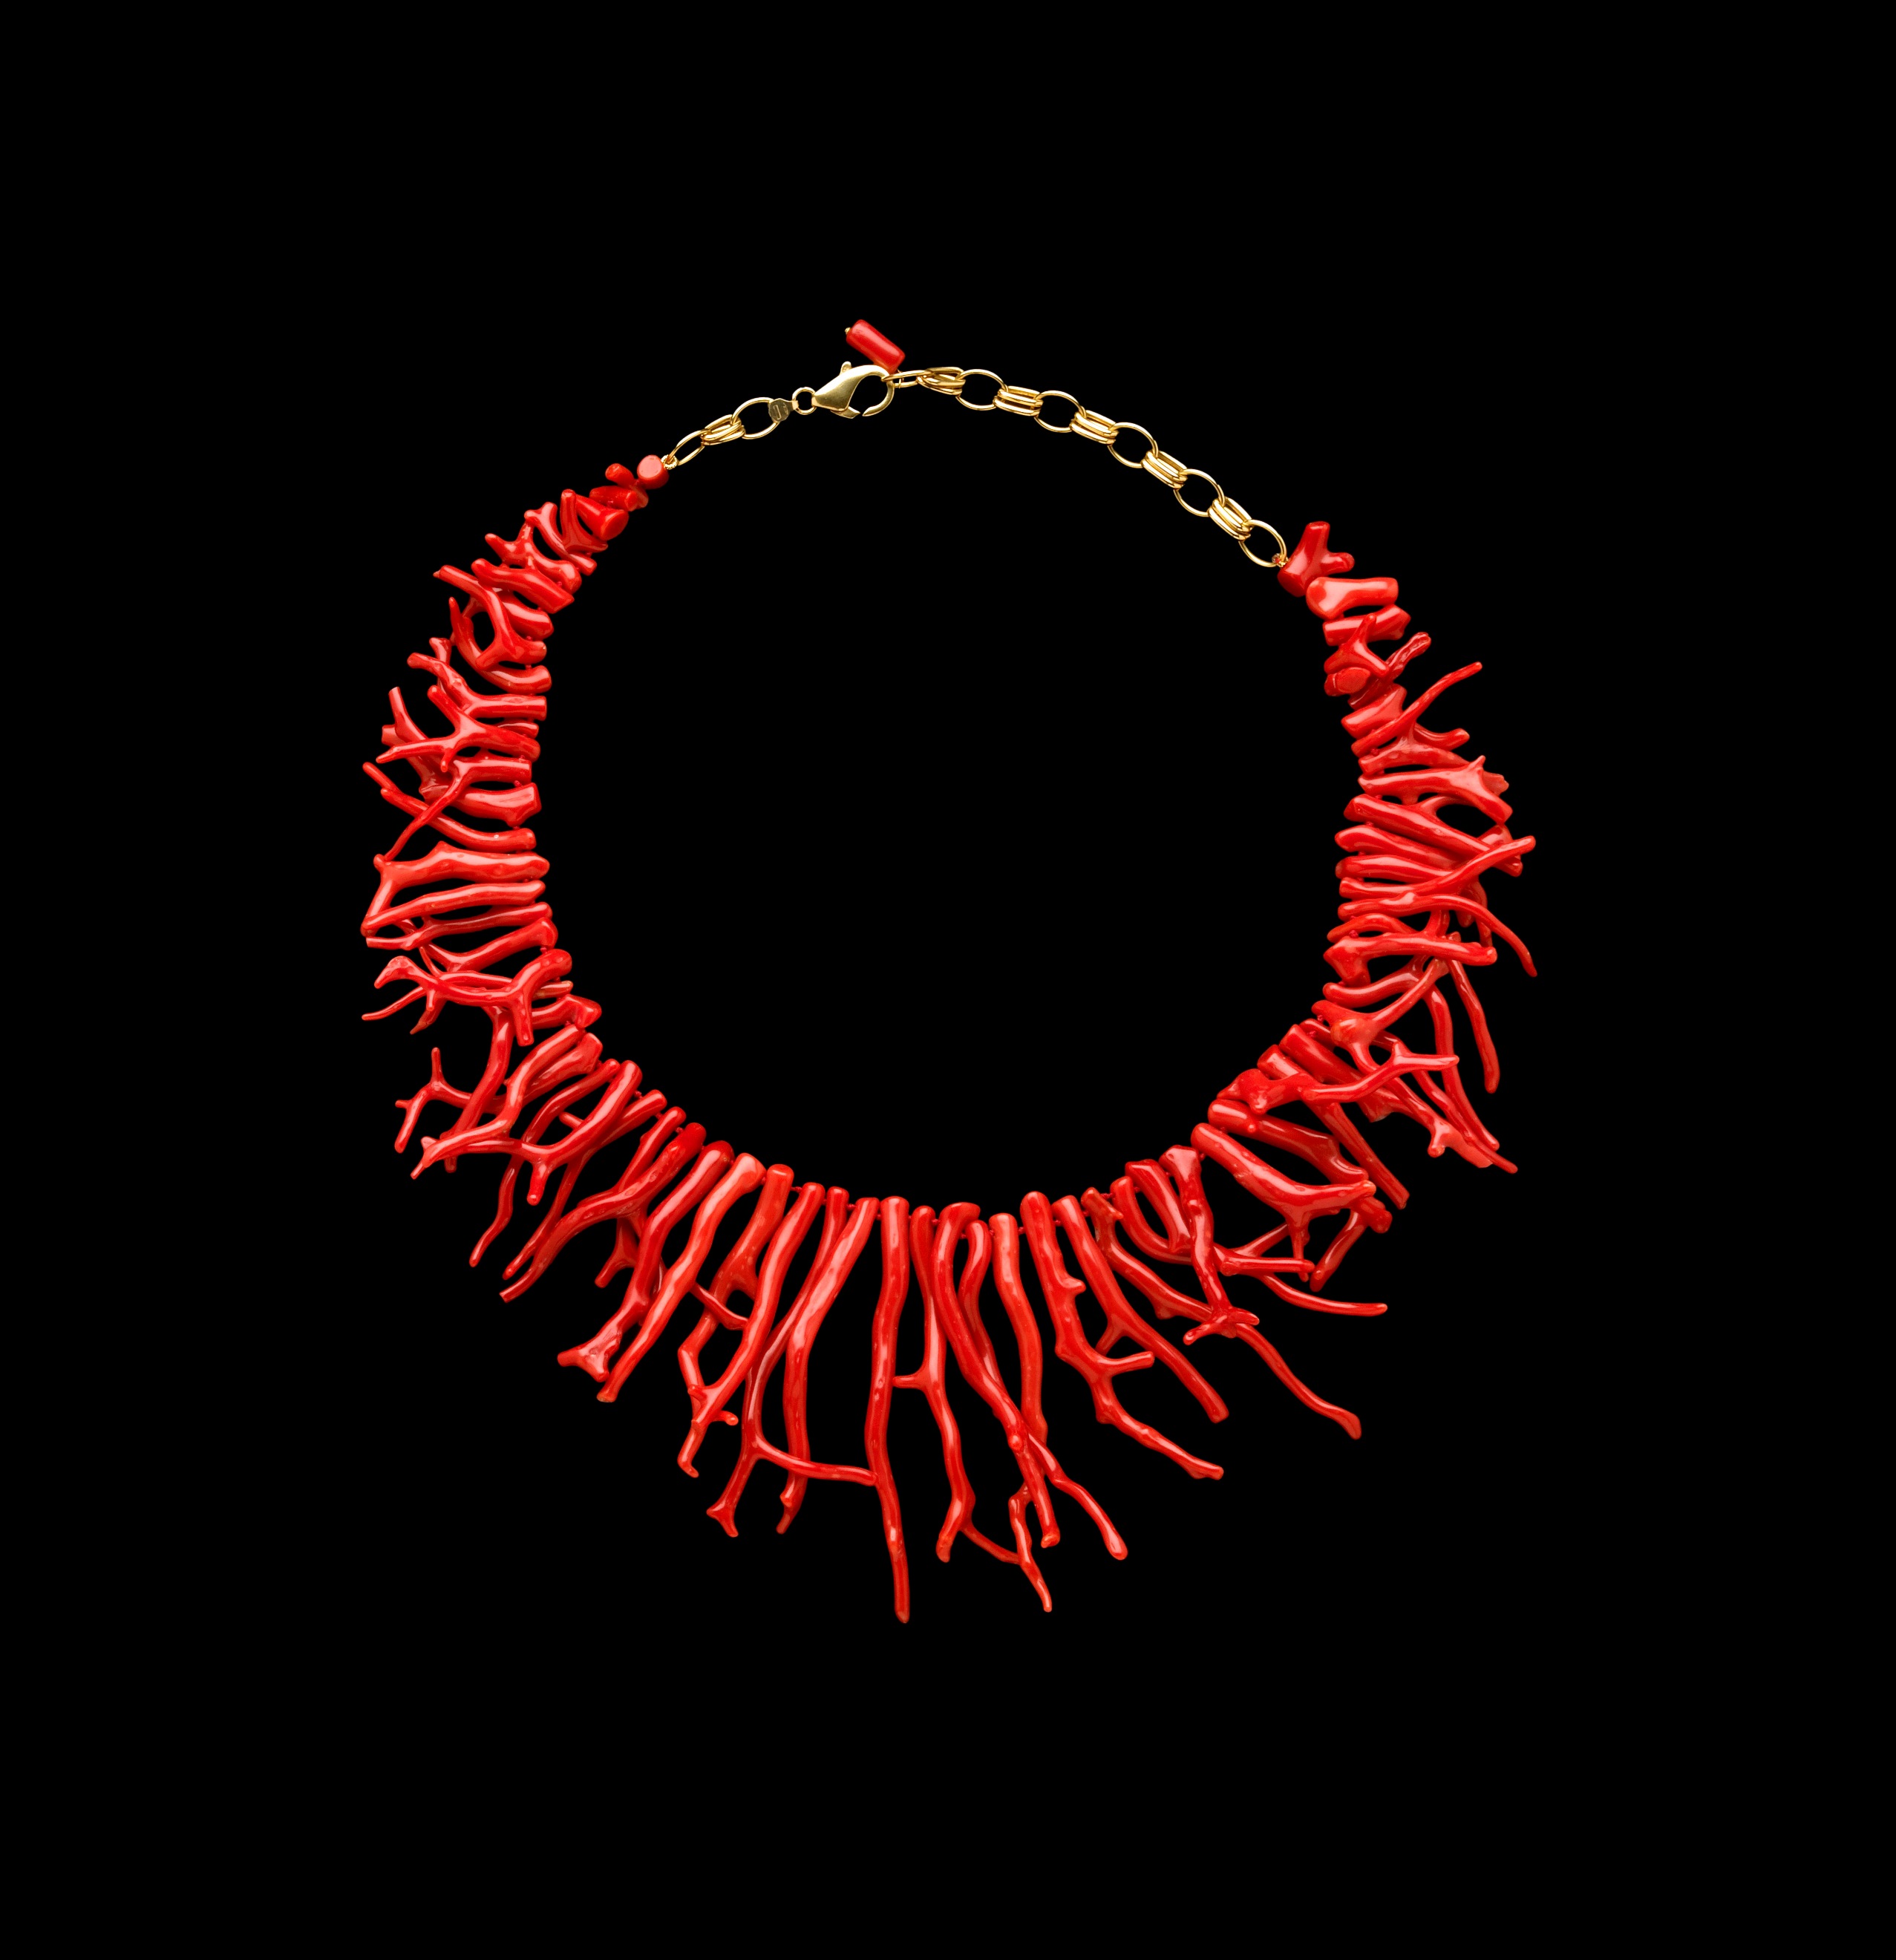 Rich red Coral necklace made of 74 small polished Coral branches.The coral branches gradually get longer as they move down from a gold clasp toward the center of the necklace.